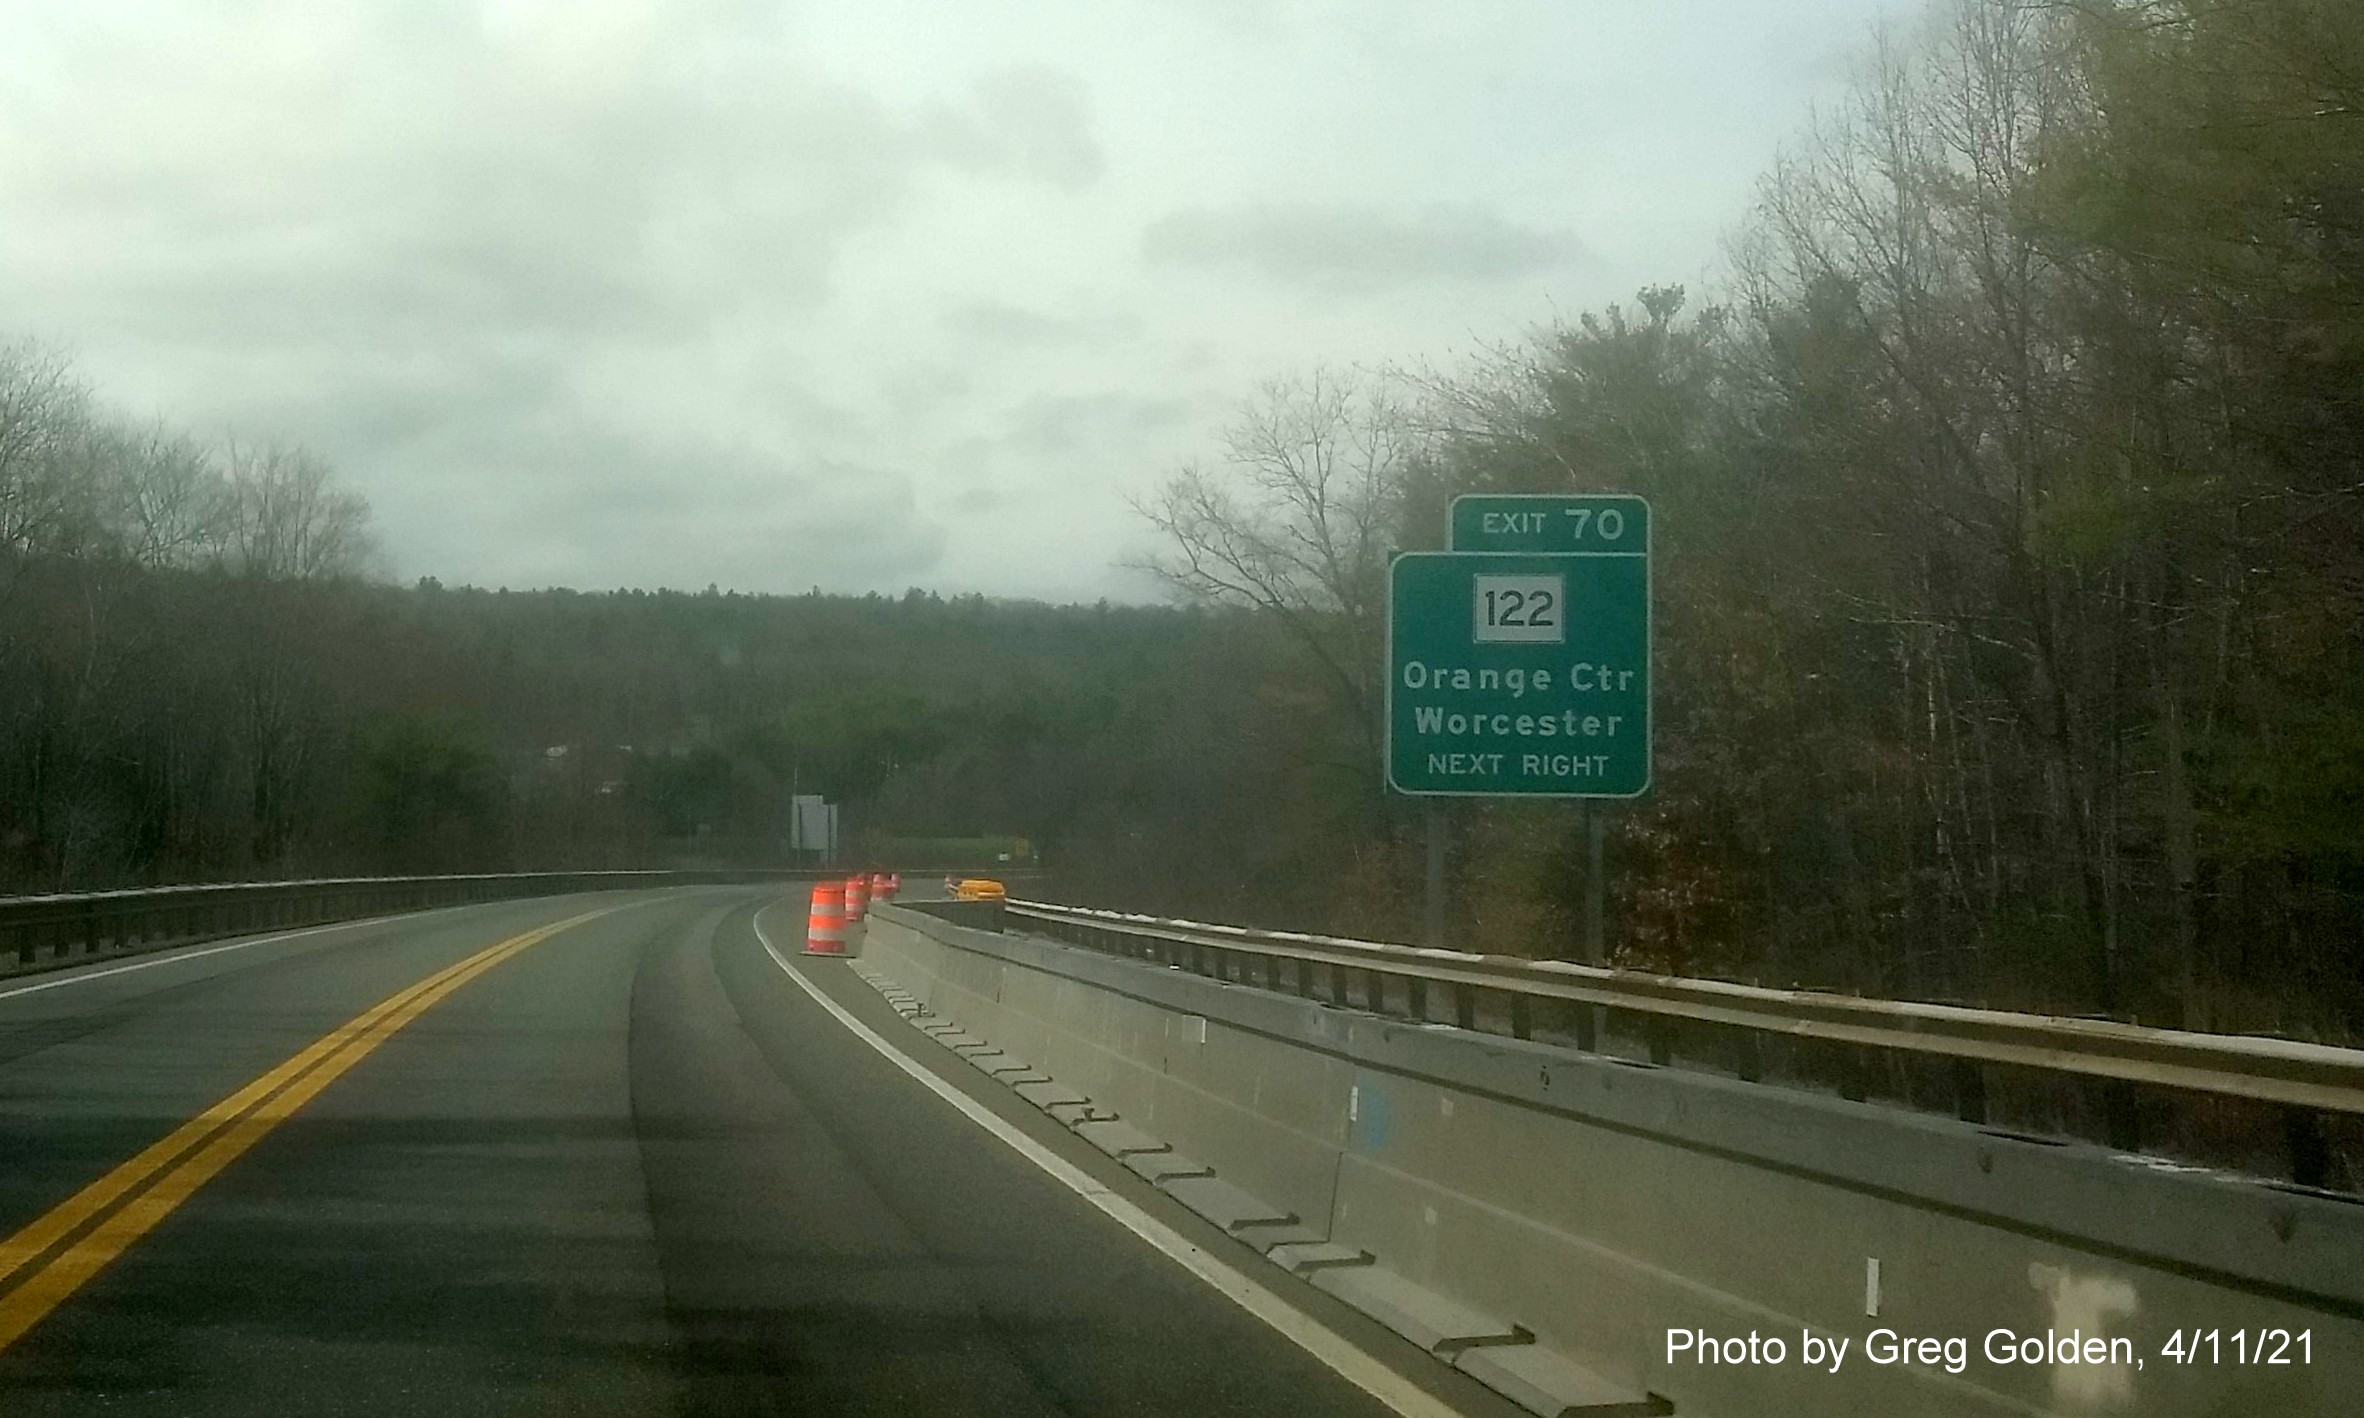 Image of advance Next Right sign for MA 122 exit with new milepost based exit number on MA 2 West in Orange, by Greg Goldman, April 2021